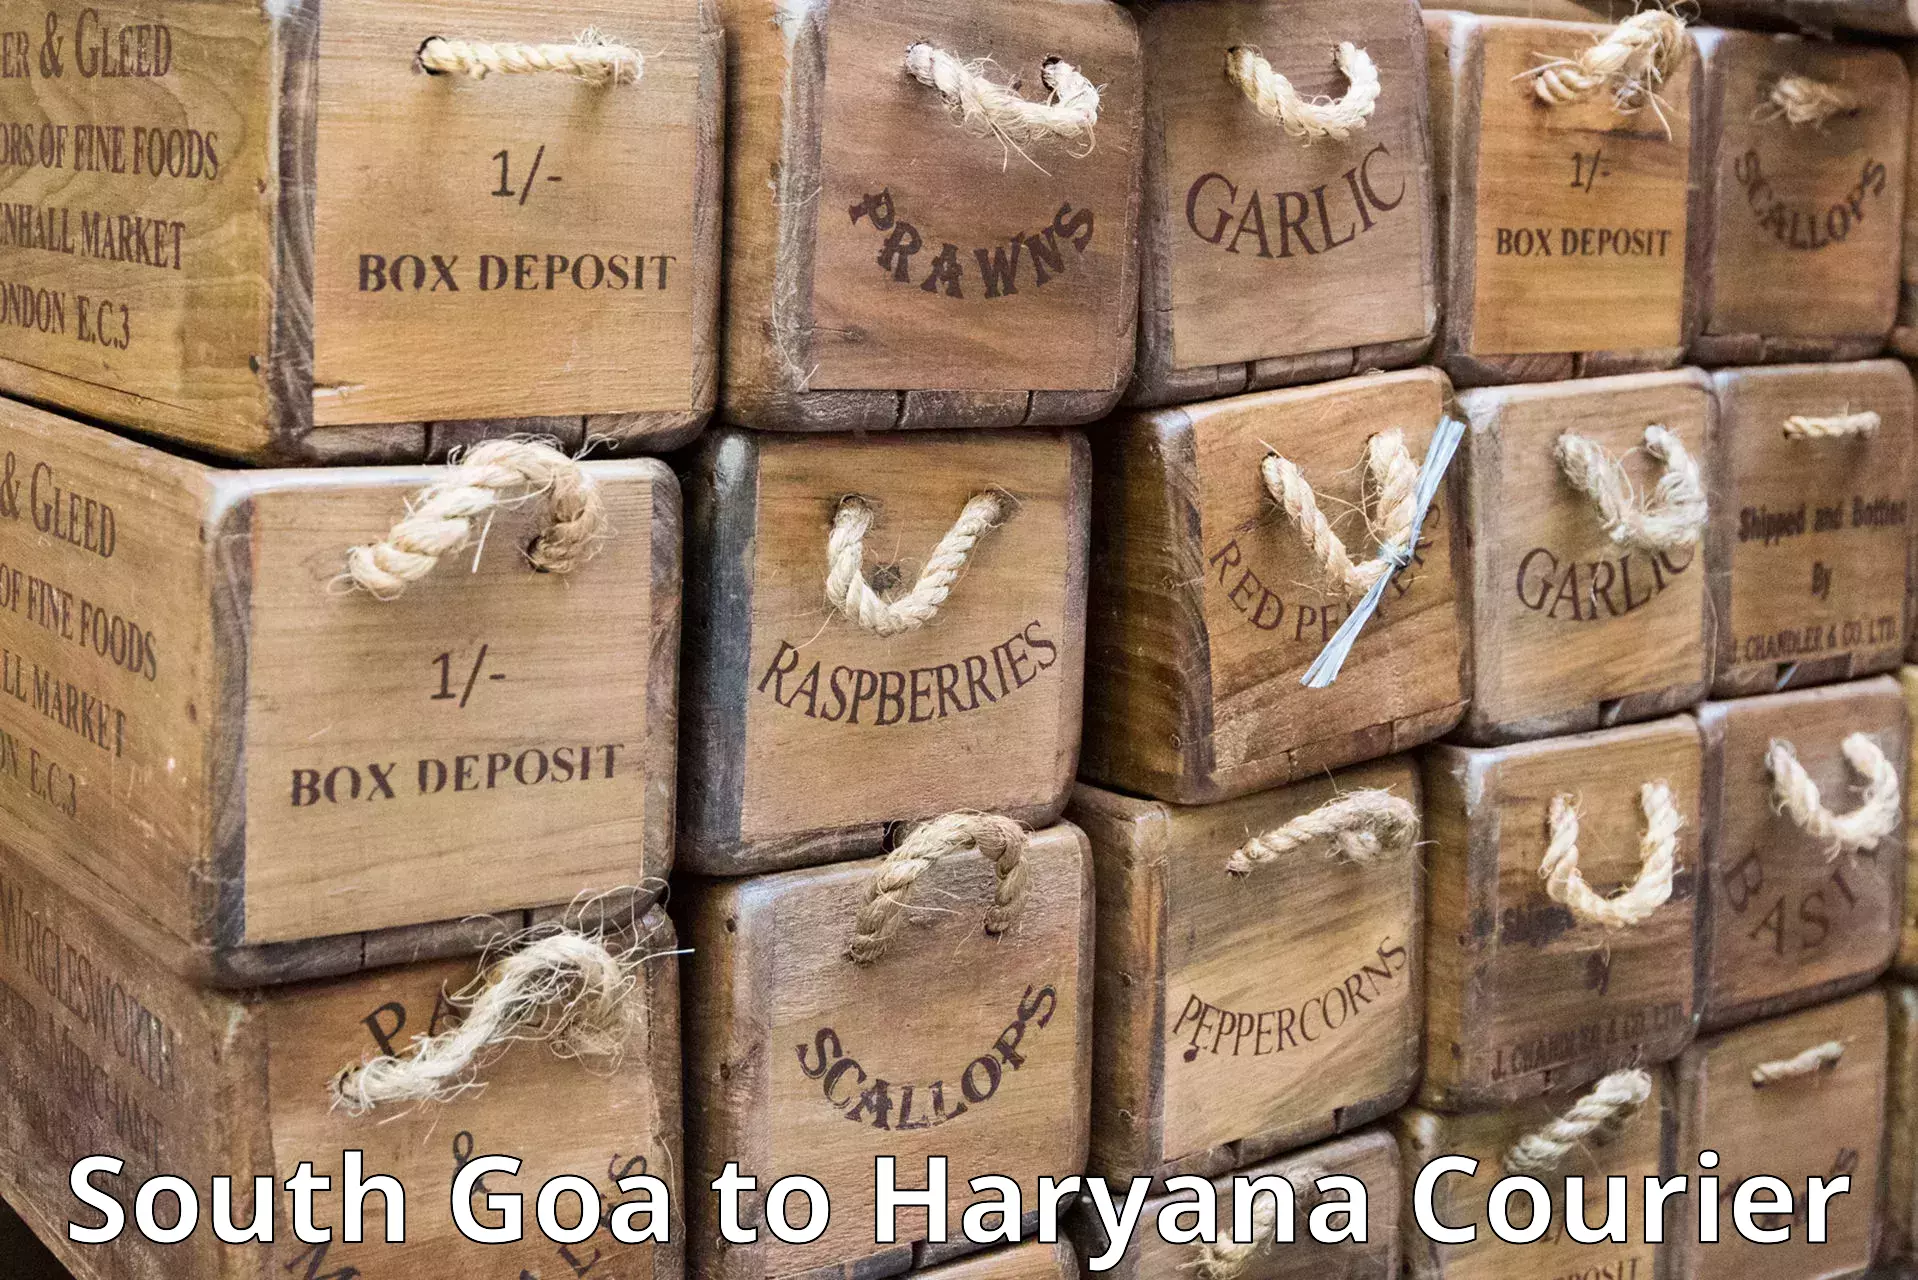 Courier app South Goa to Panipat